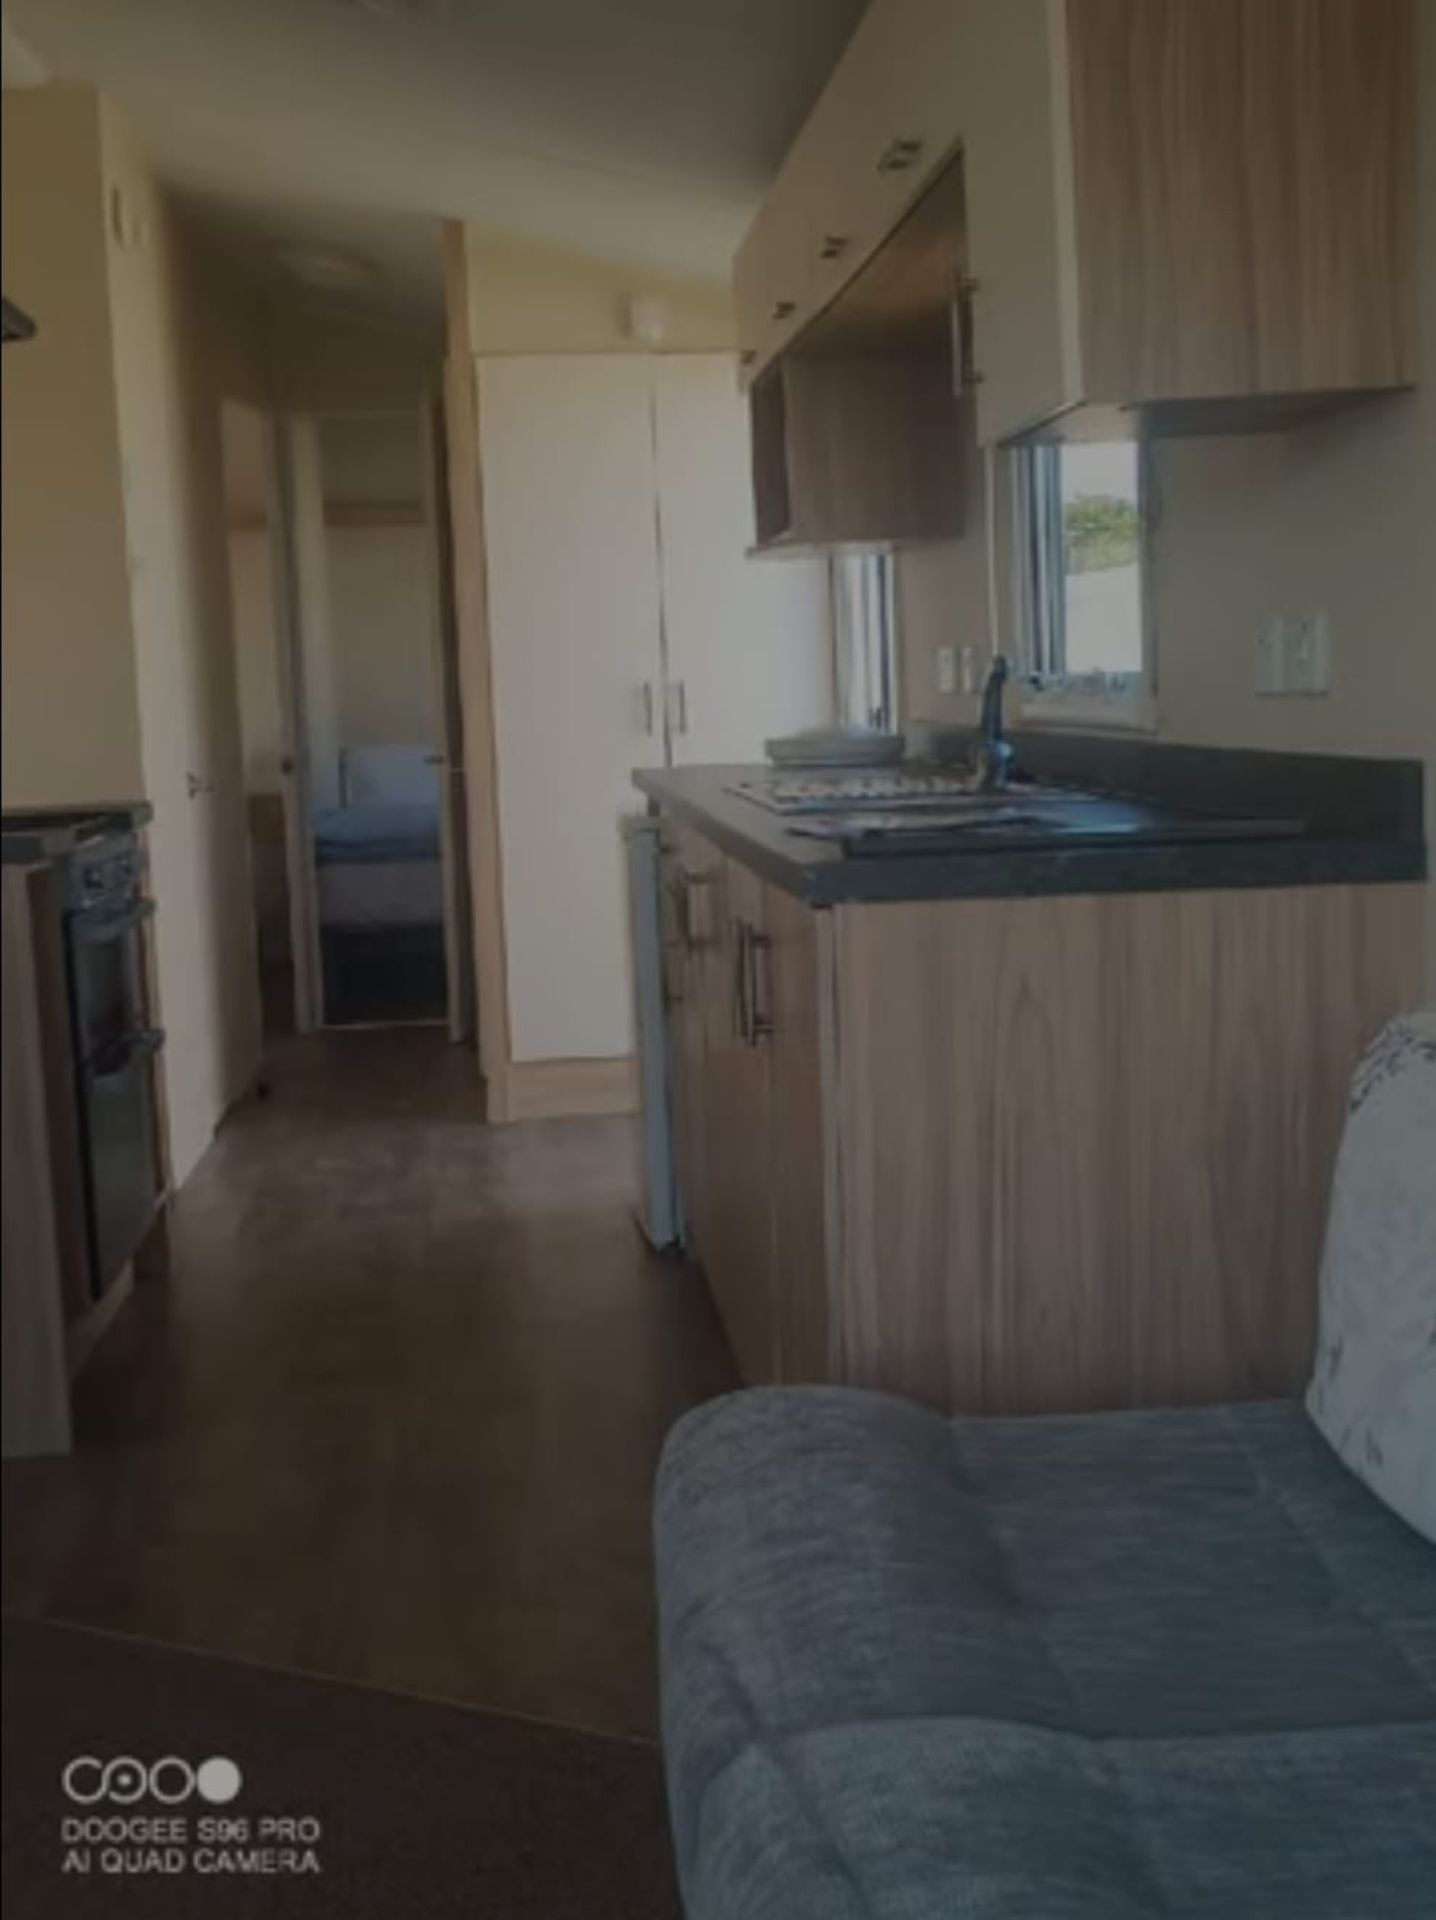 2015 WILLERBY ECO SALSA 3 BEDROOM holiday home ON-SITE SALE. LAST CHANCE!!! **RESERVE REDUCED** - Bild 13 aus 13